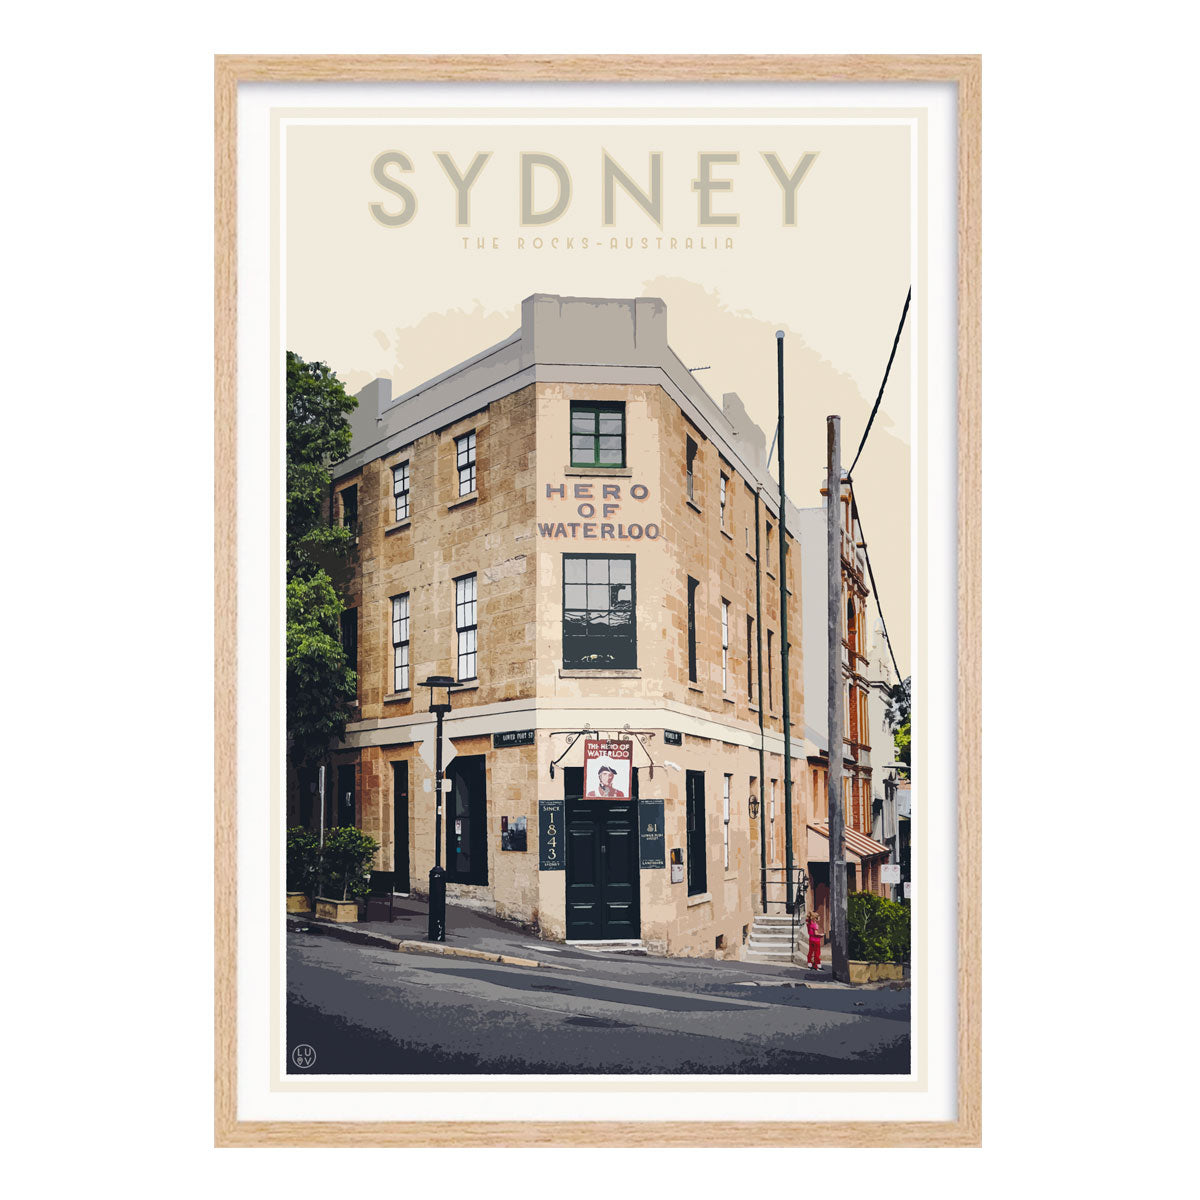 Sydney the rocks vintage retro poster print in oak frame from Places We Luv